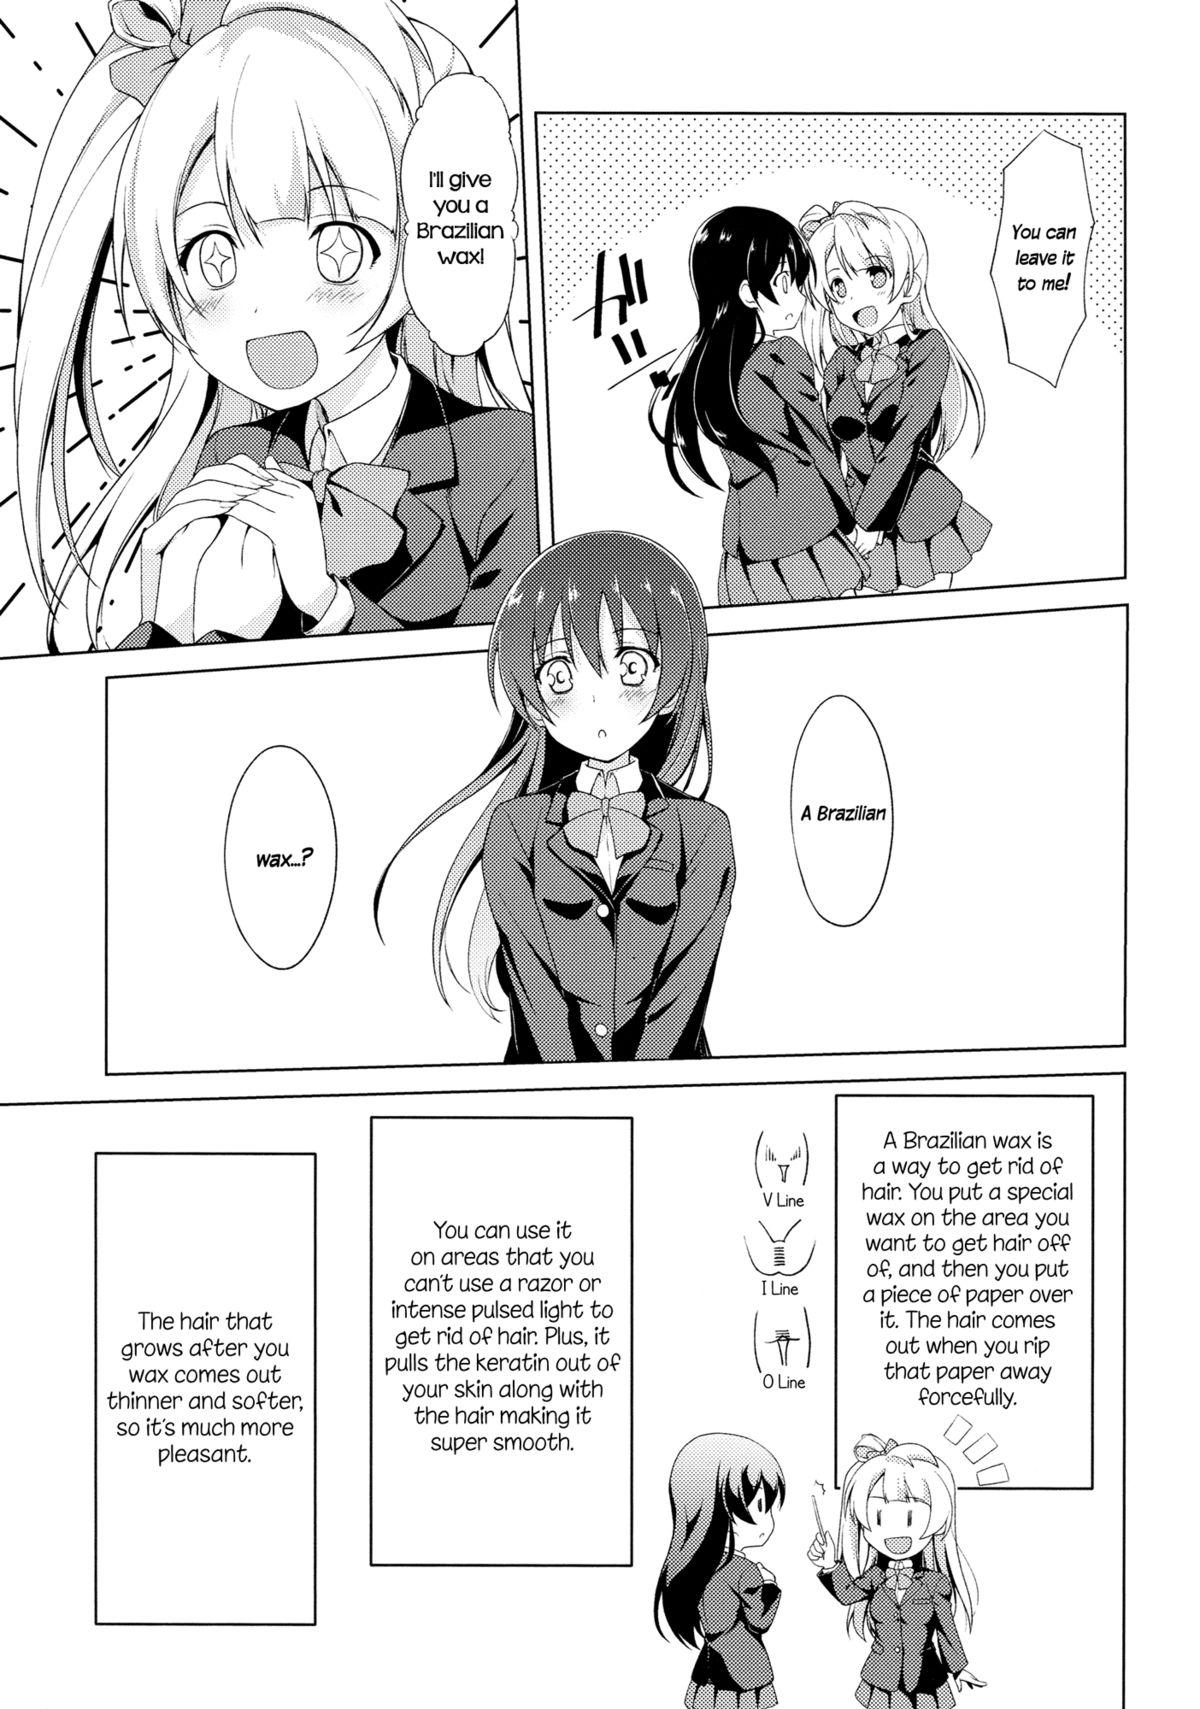 Blowjob Contest Marshmallow Mischief + Macaron Temptation | Marshmallow Mischief & Macaroon Affection - Love live Glamour Porn - Page 4